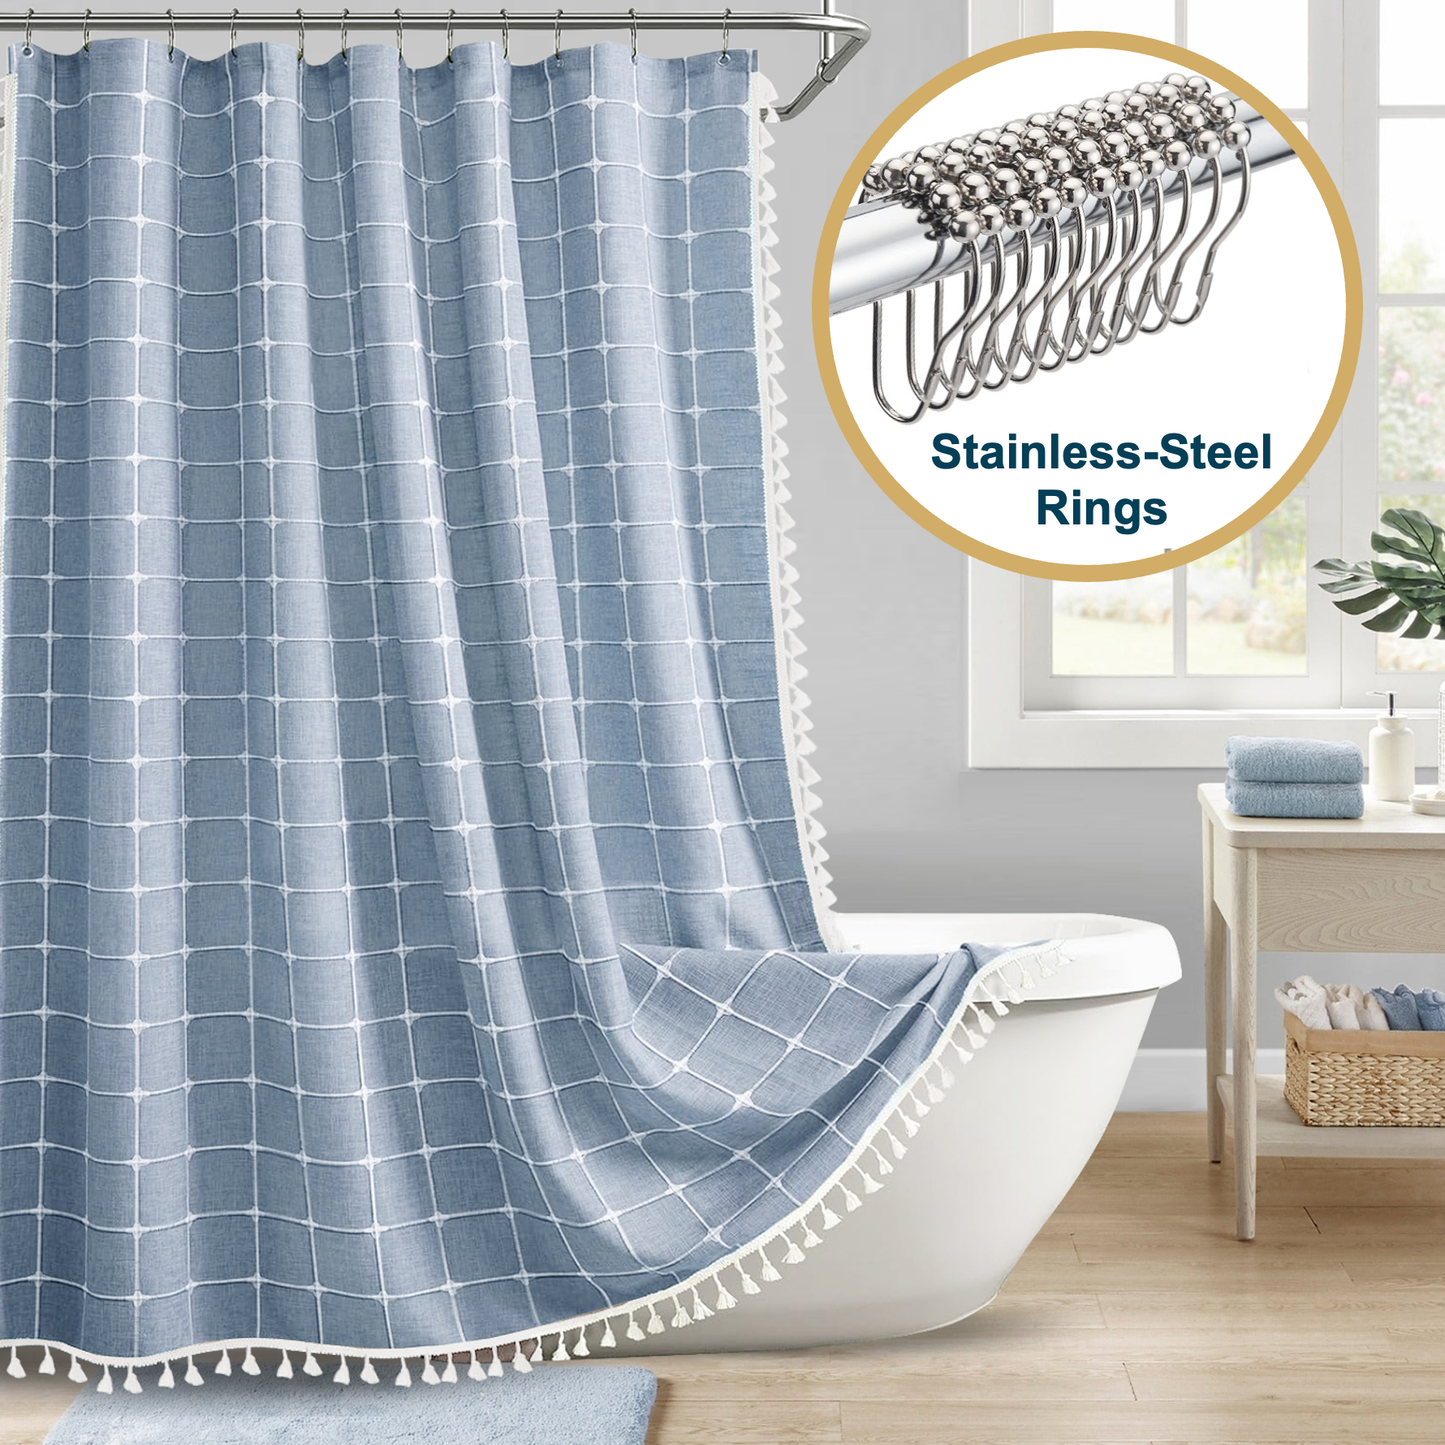 Tassel Shower Curtain and Stainless-Steel Hooks Set, 330 GSM, 72 x 72 in